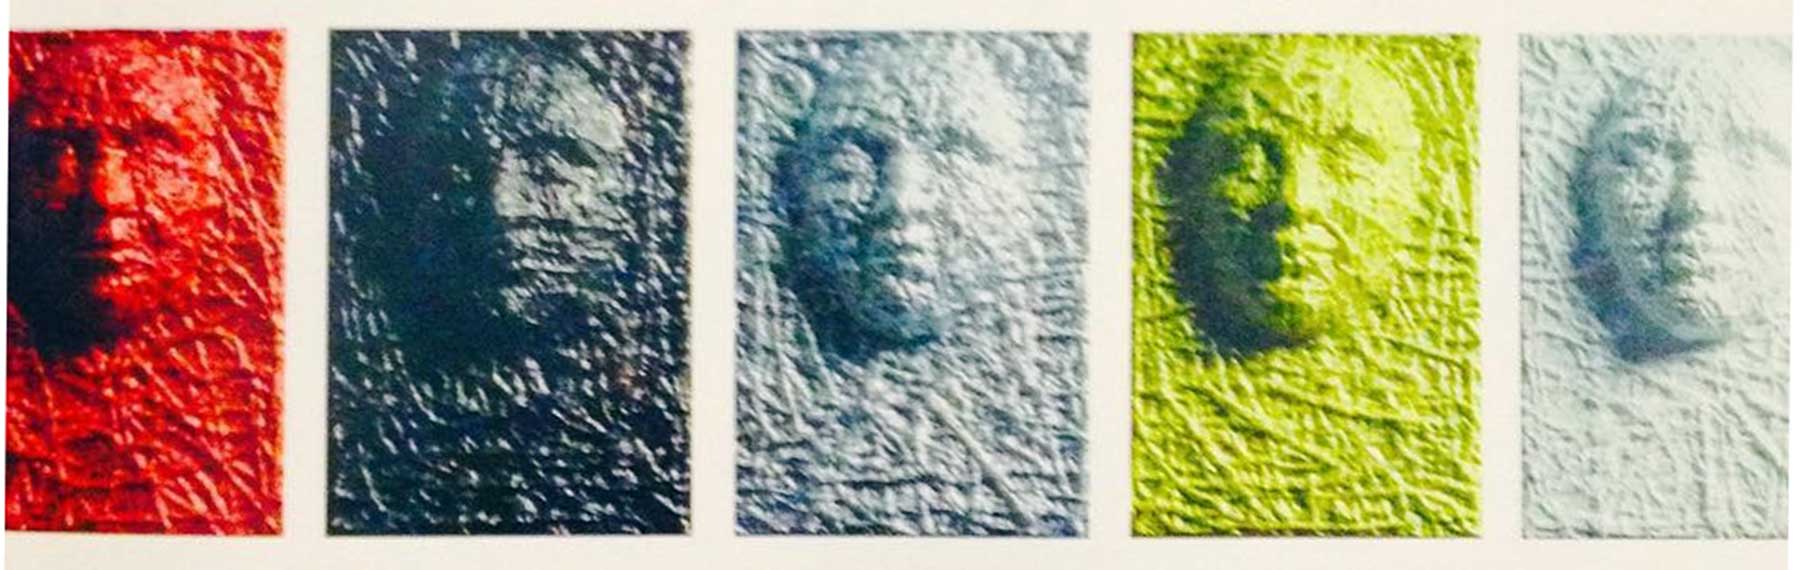 Faces, painting by Nicola Guerraz, acrylic on resin and canvas, pentaptych, 30 x 60 cm each, 1994